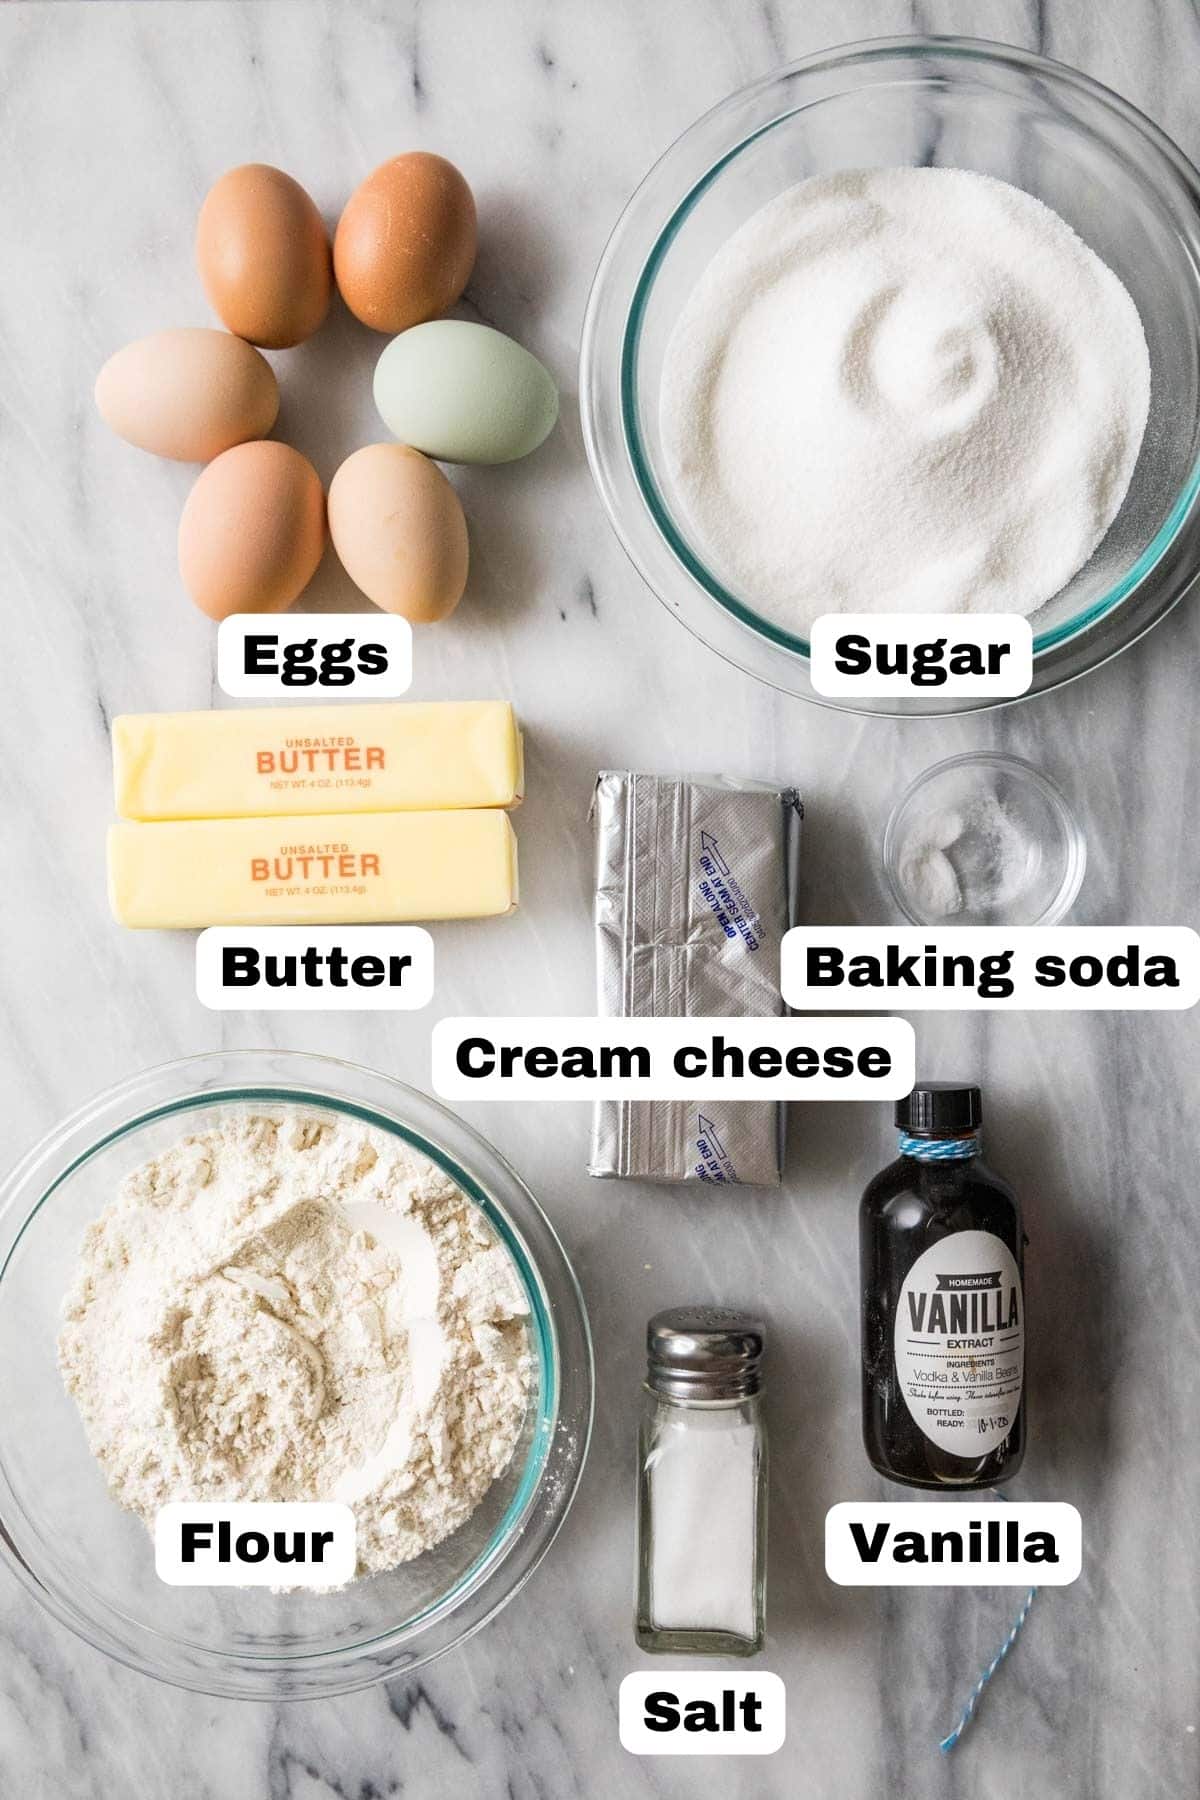 Overhead view of labelled ingredients including eggs, sugar, cream cheese, butter, and more.